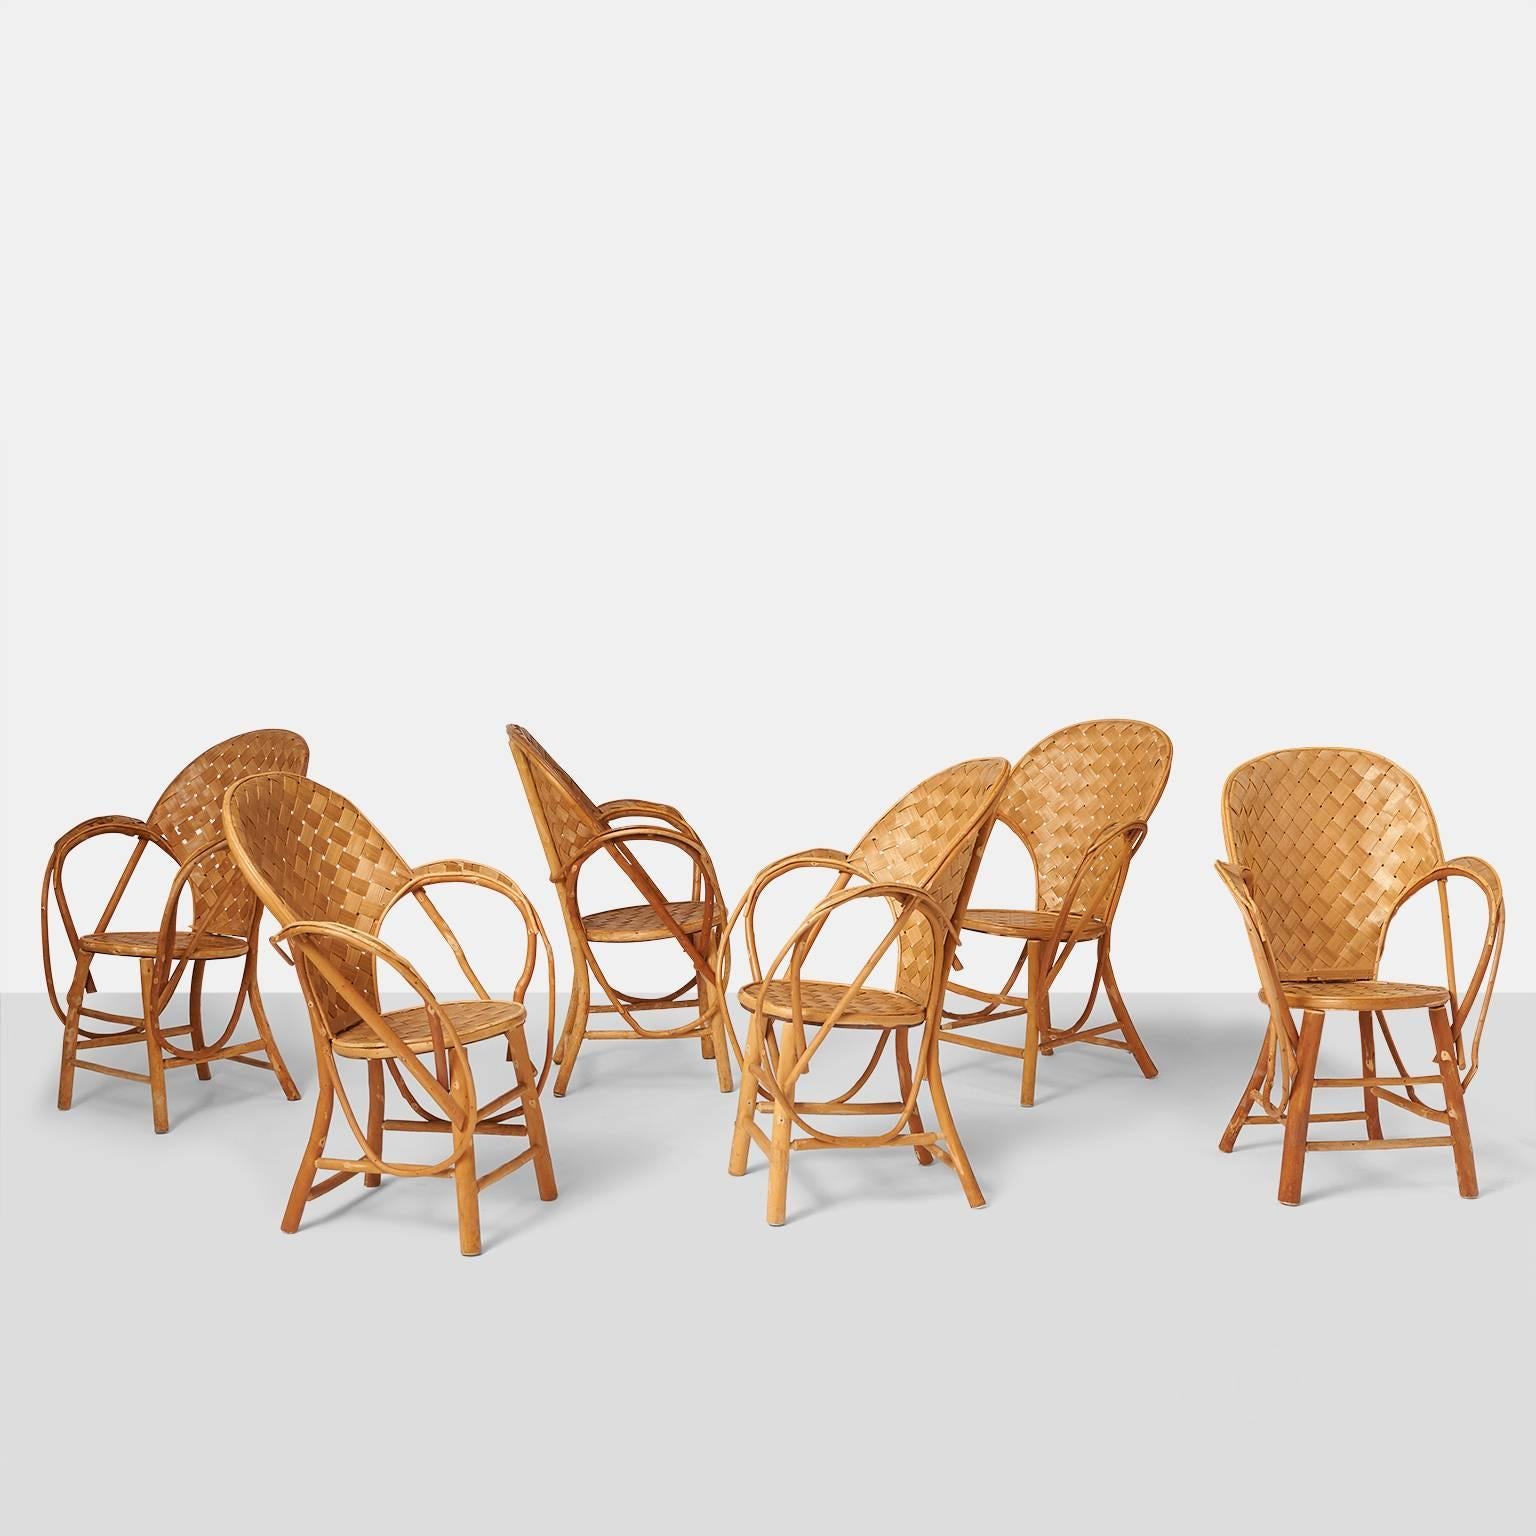 A rare set of six completely handmade rattan chairs by Le Corbusier.
France, circa 1960